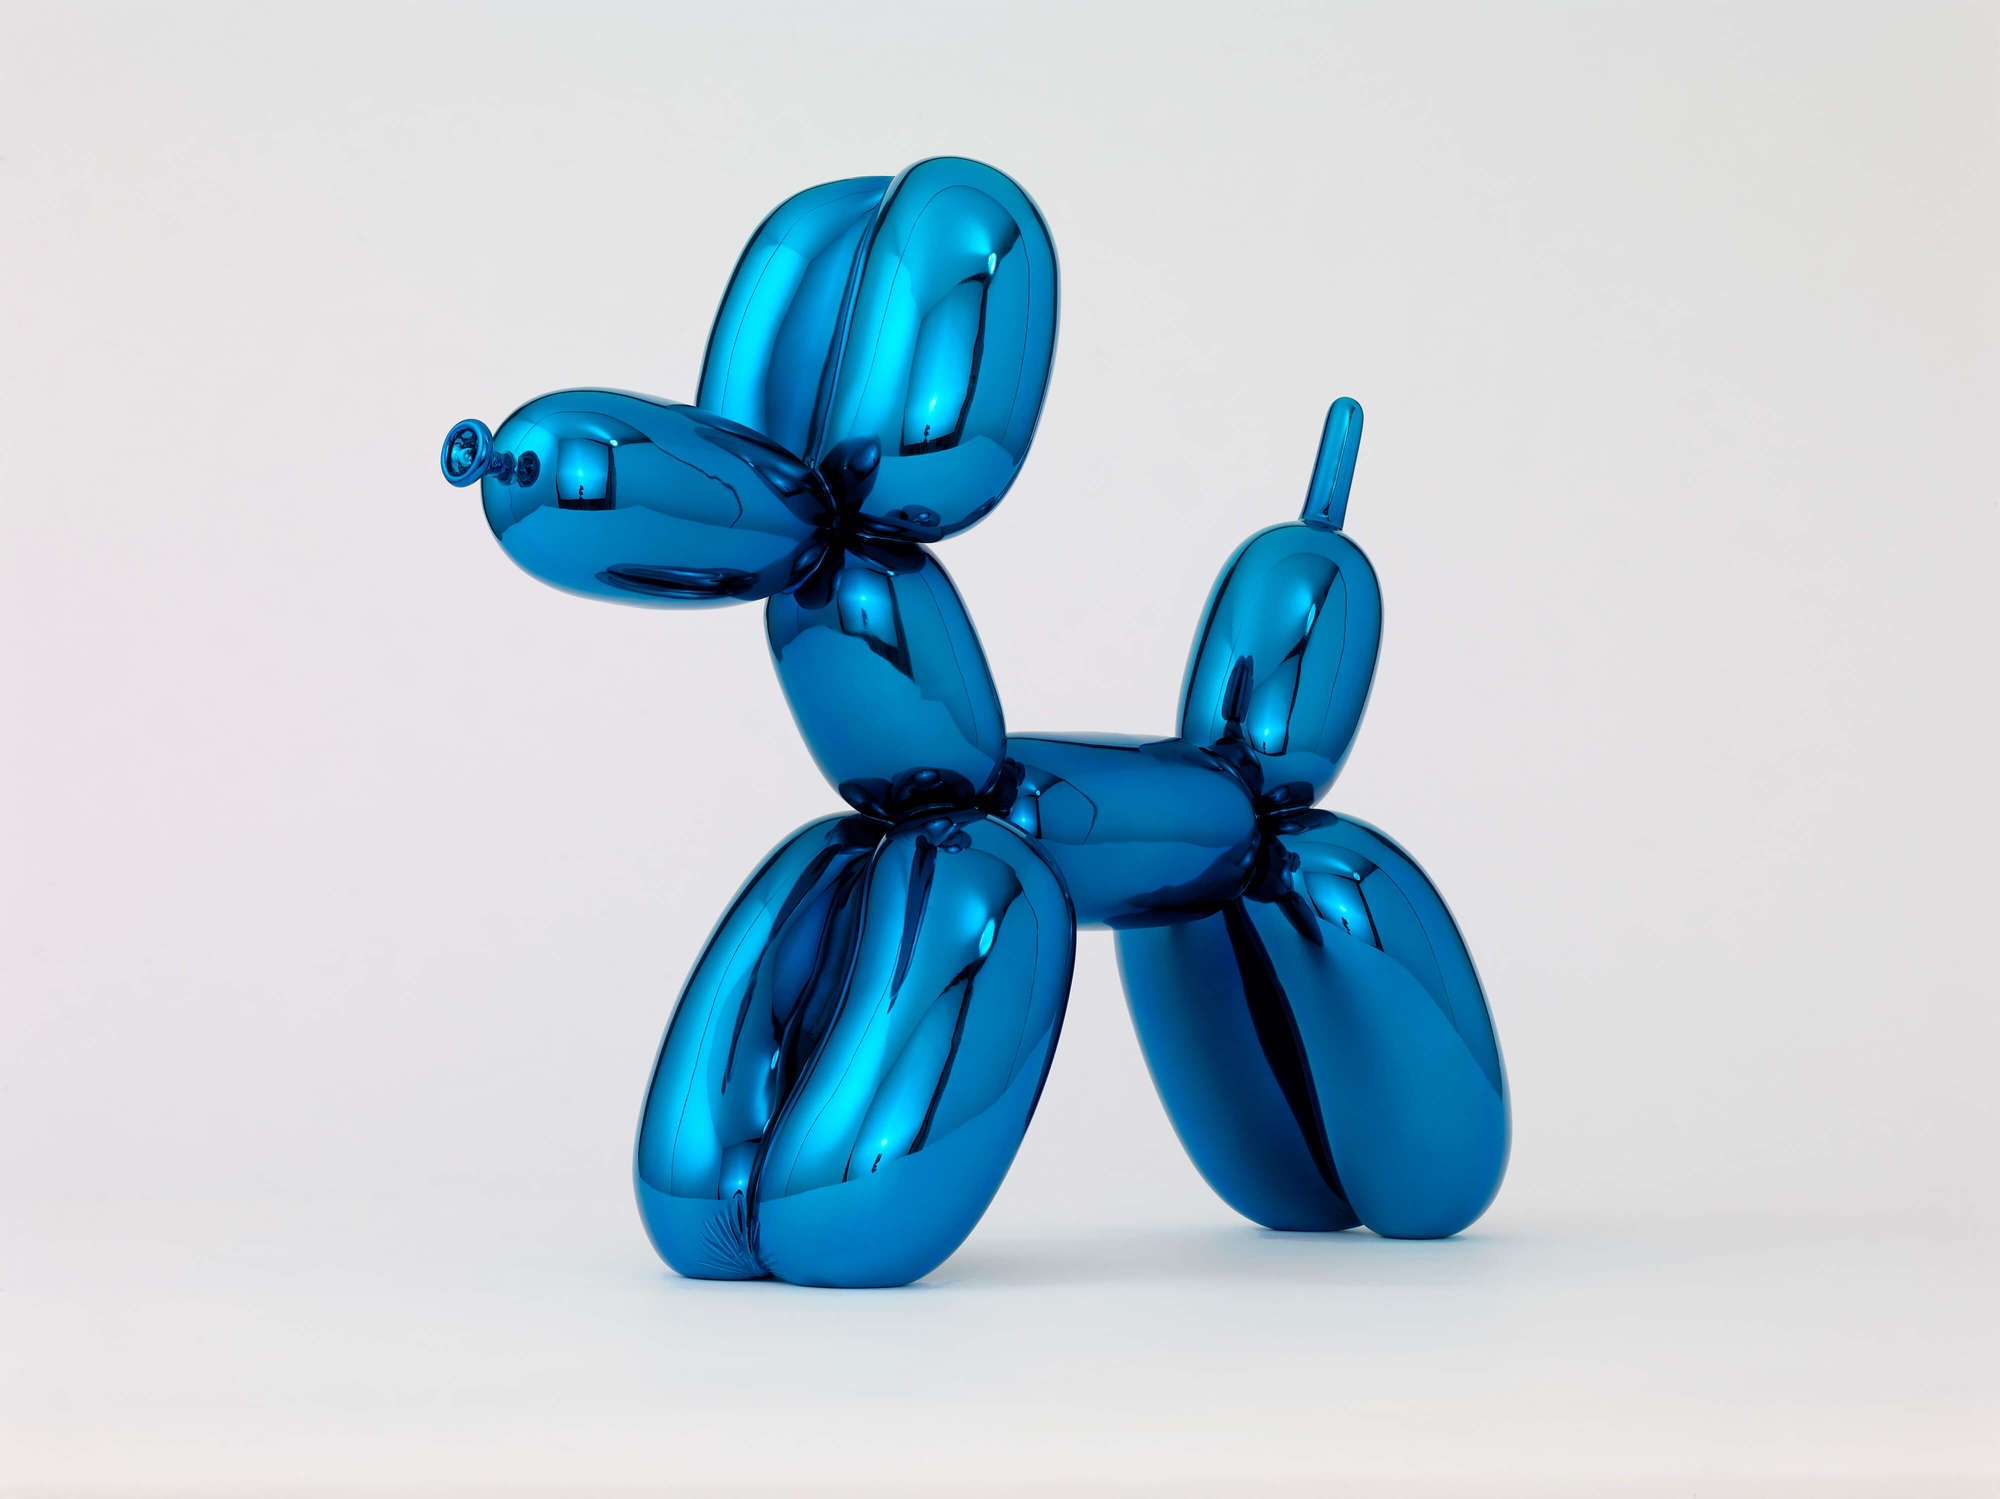 Balloon Dog (Blue) by Jeff Koons, 1955